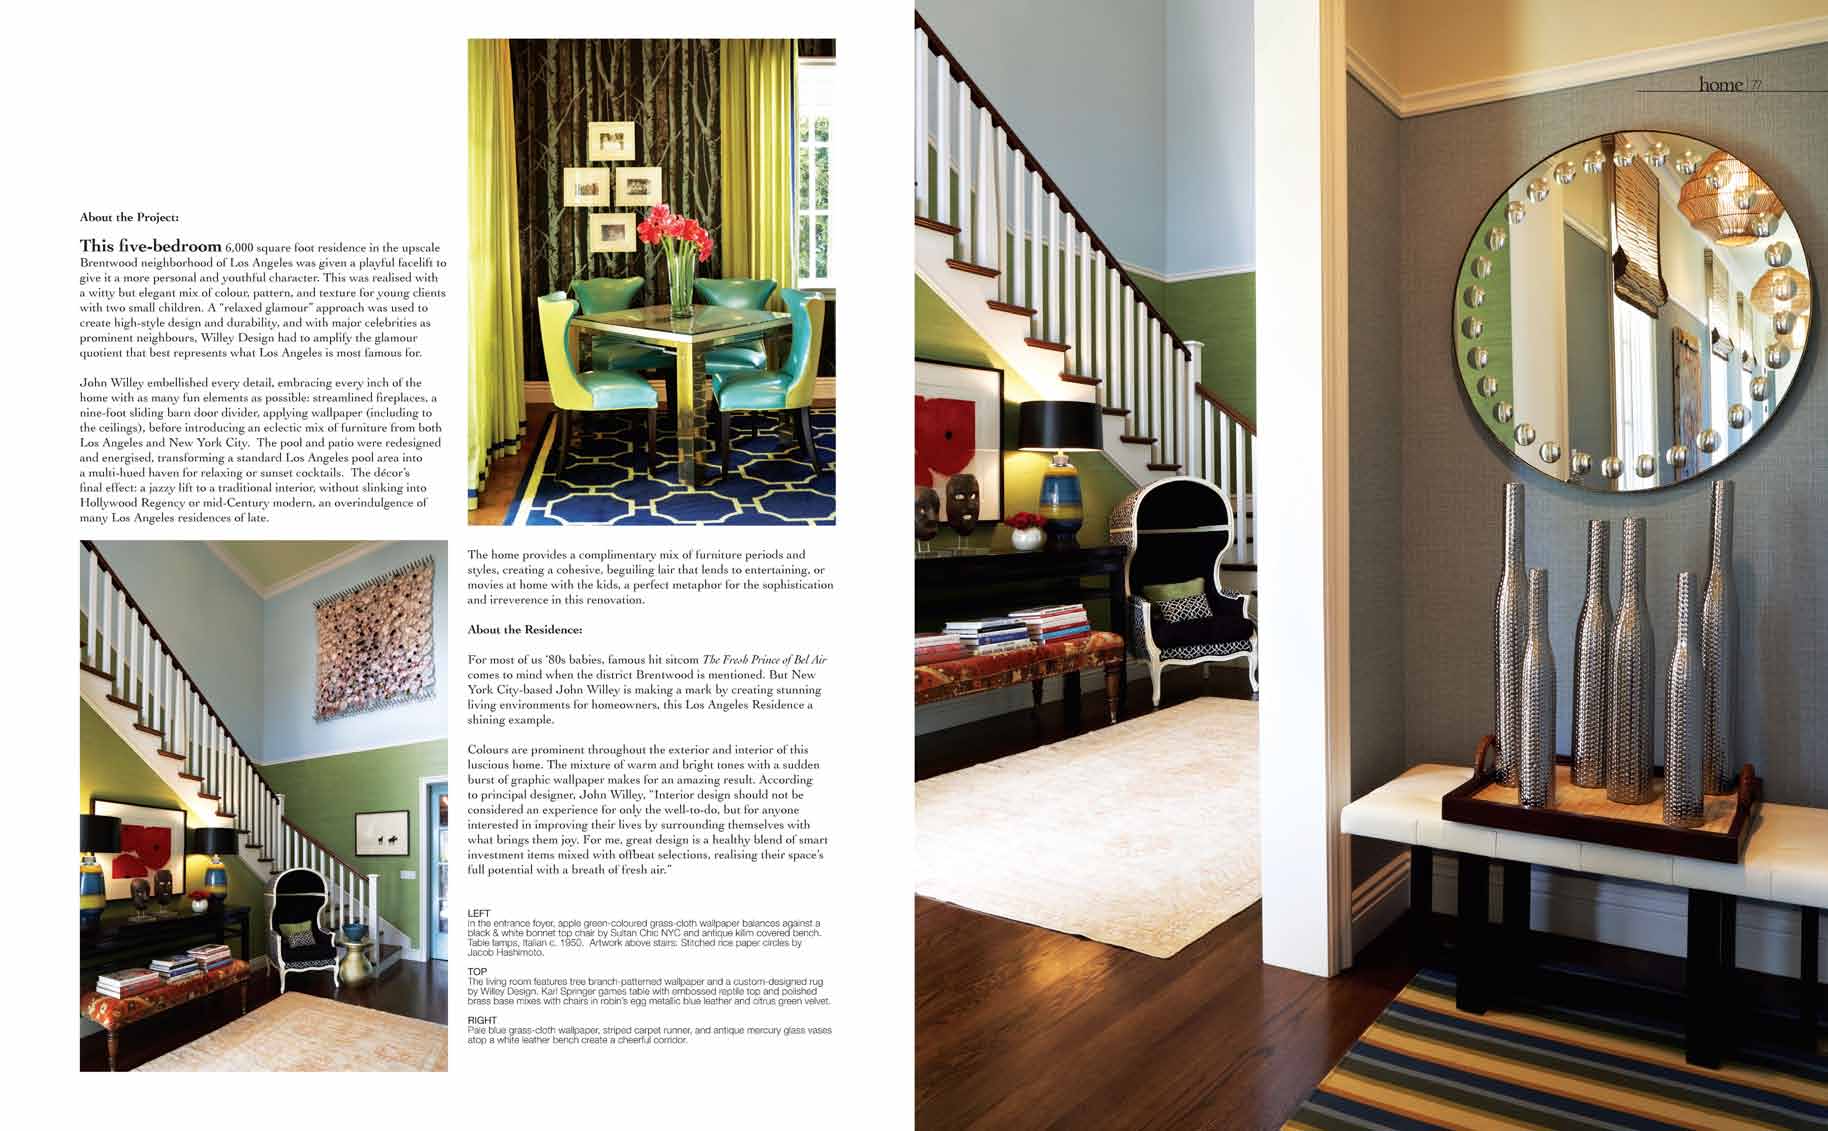 Home Concepts Malaysia 2012 JanFeb - Full Article low-res_Page_2.jpg